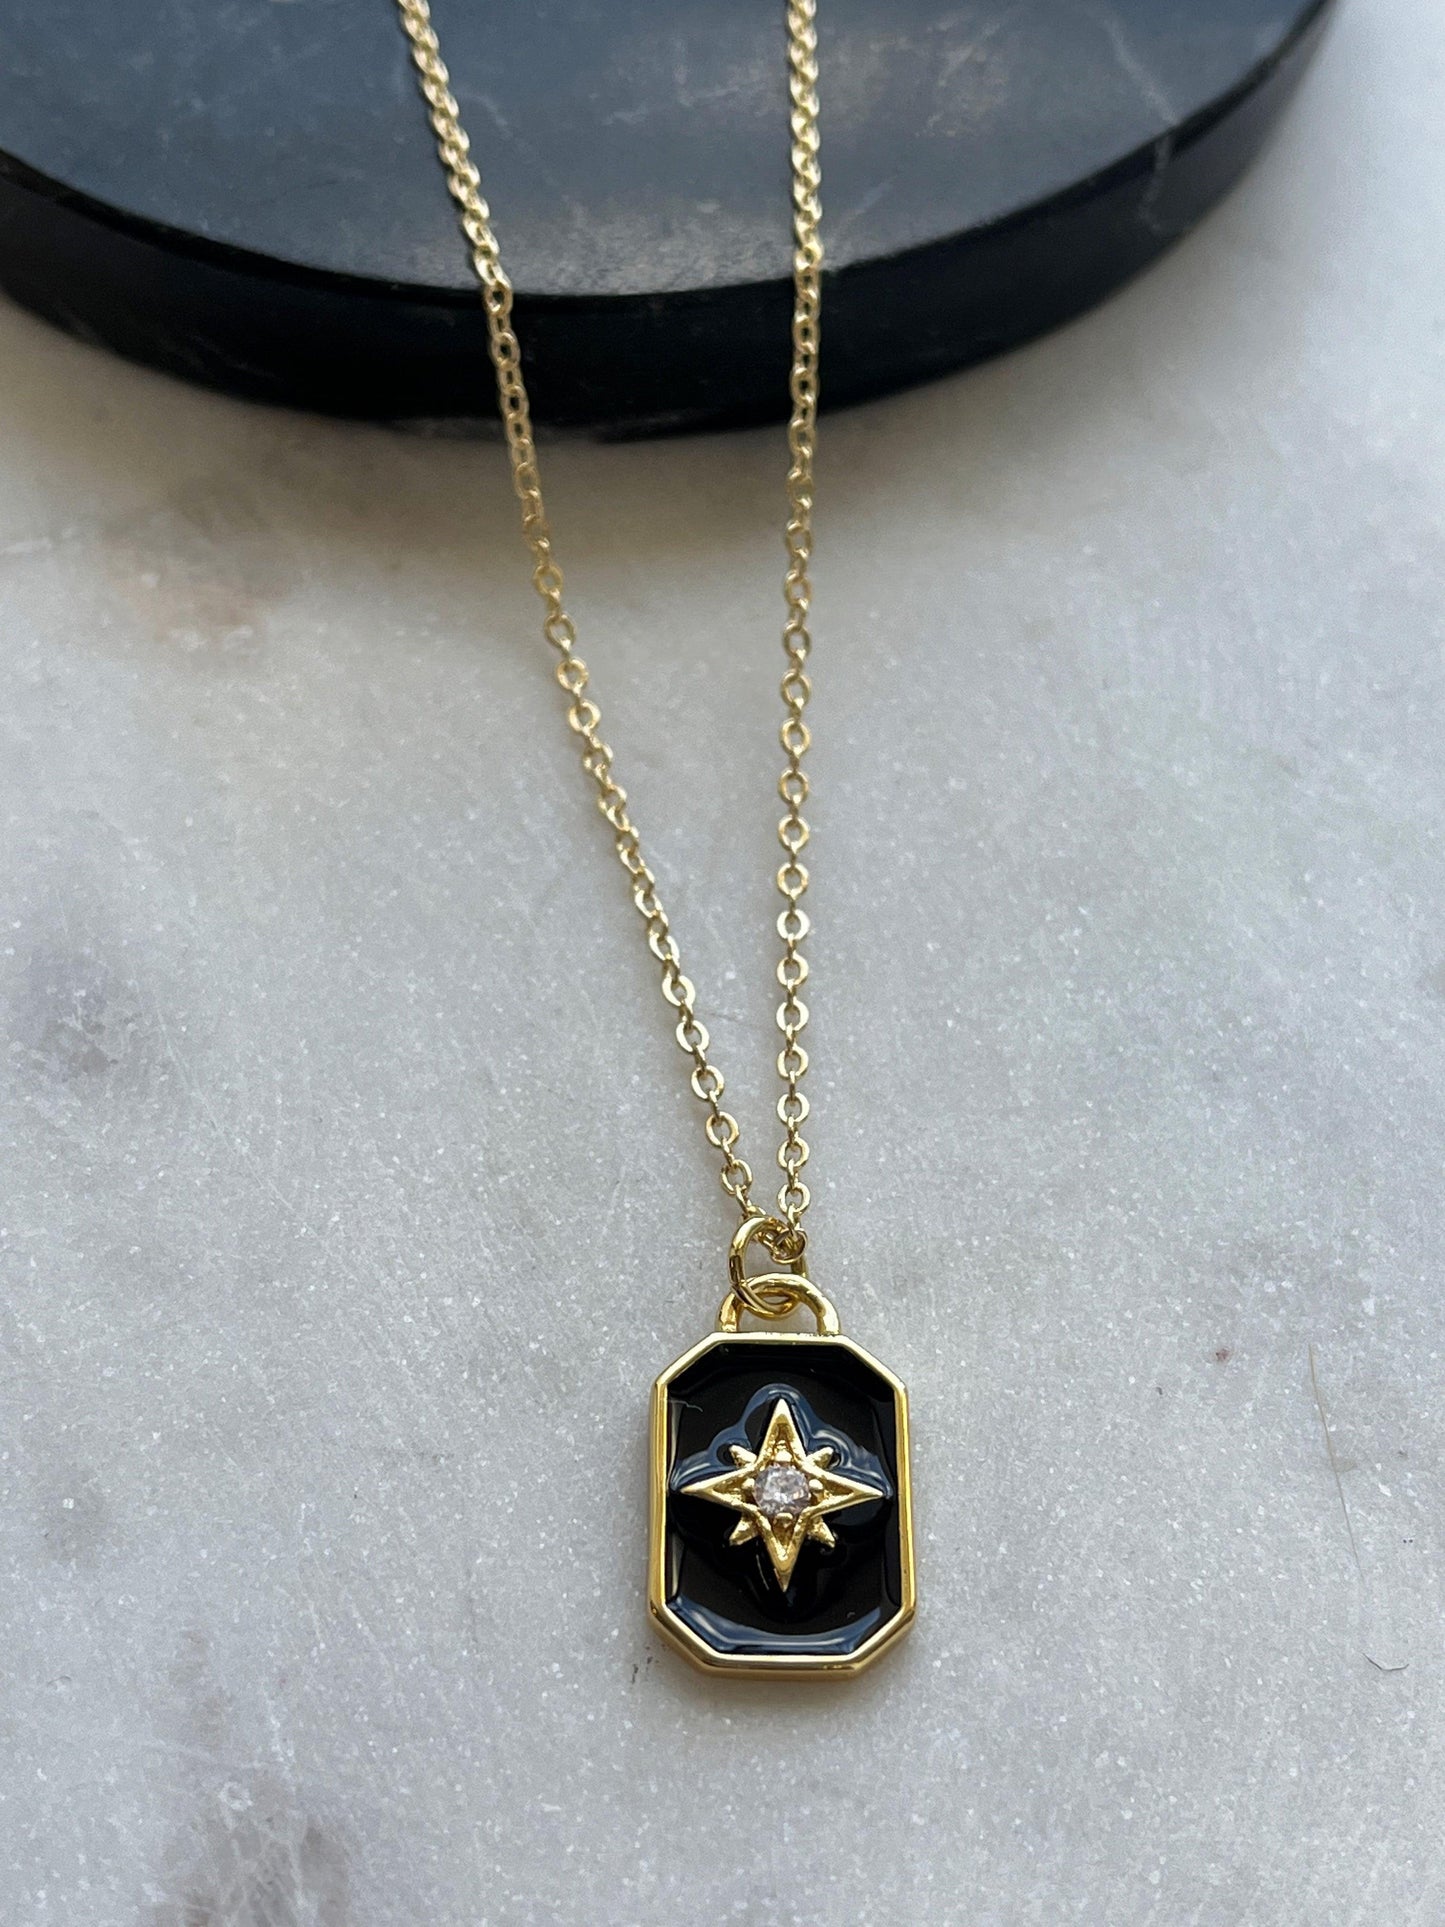 North Star pendant Necklace - Kybalion Jewellery